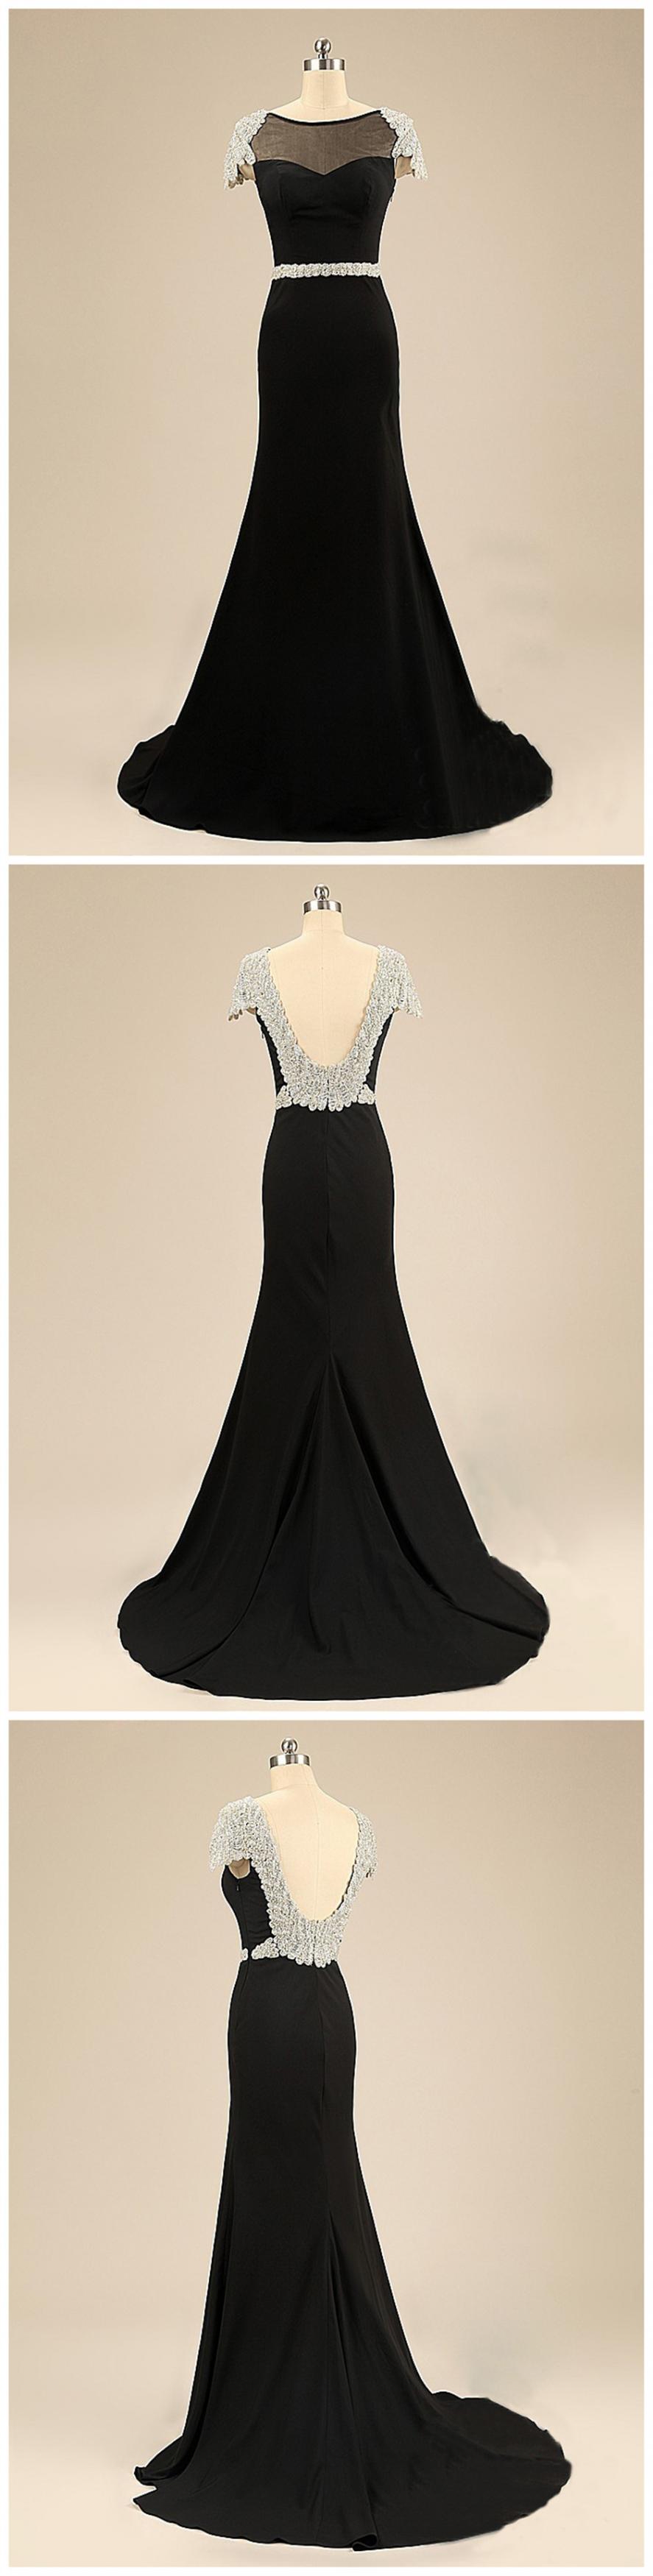 Prom Dresses,Evening Dress,Party Dresses,Black Prom Dresses,Backless Prom Dress,Chiffon Prom Dress,Mermaid Prom Dresses,2017 Formal Gown,Open Back Evening Gowns,Open Backs Party Dress,Prom Gown For Teens